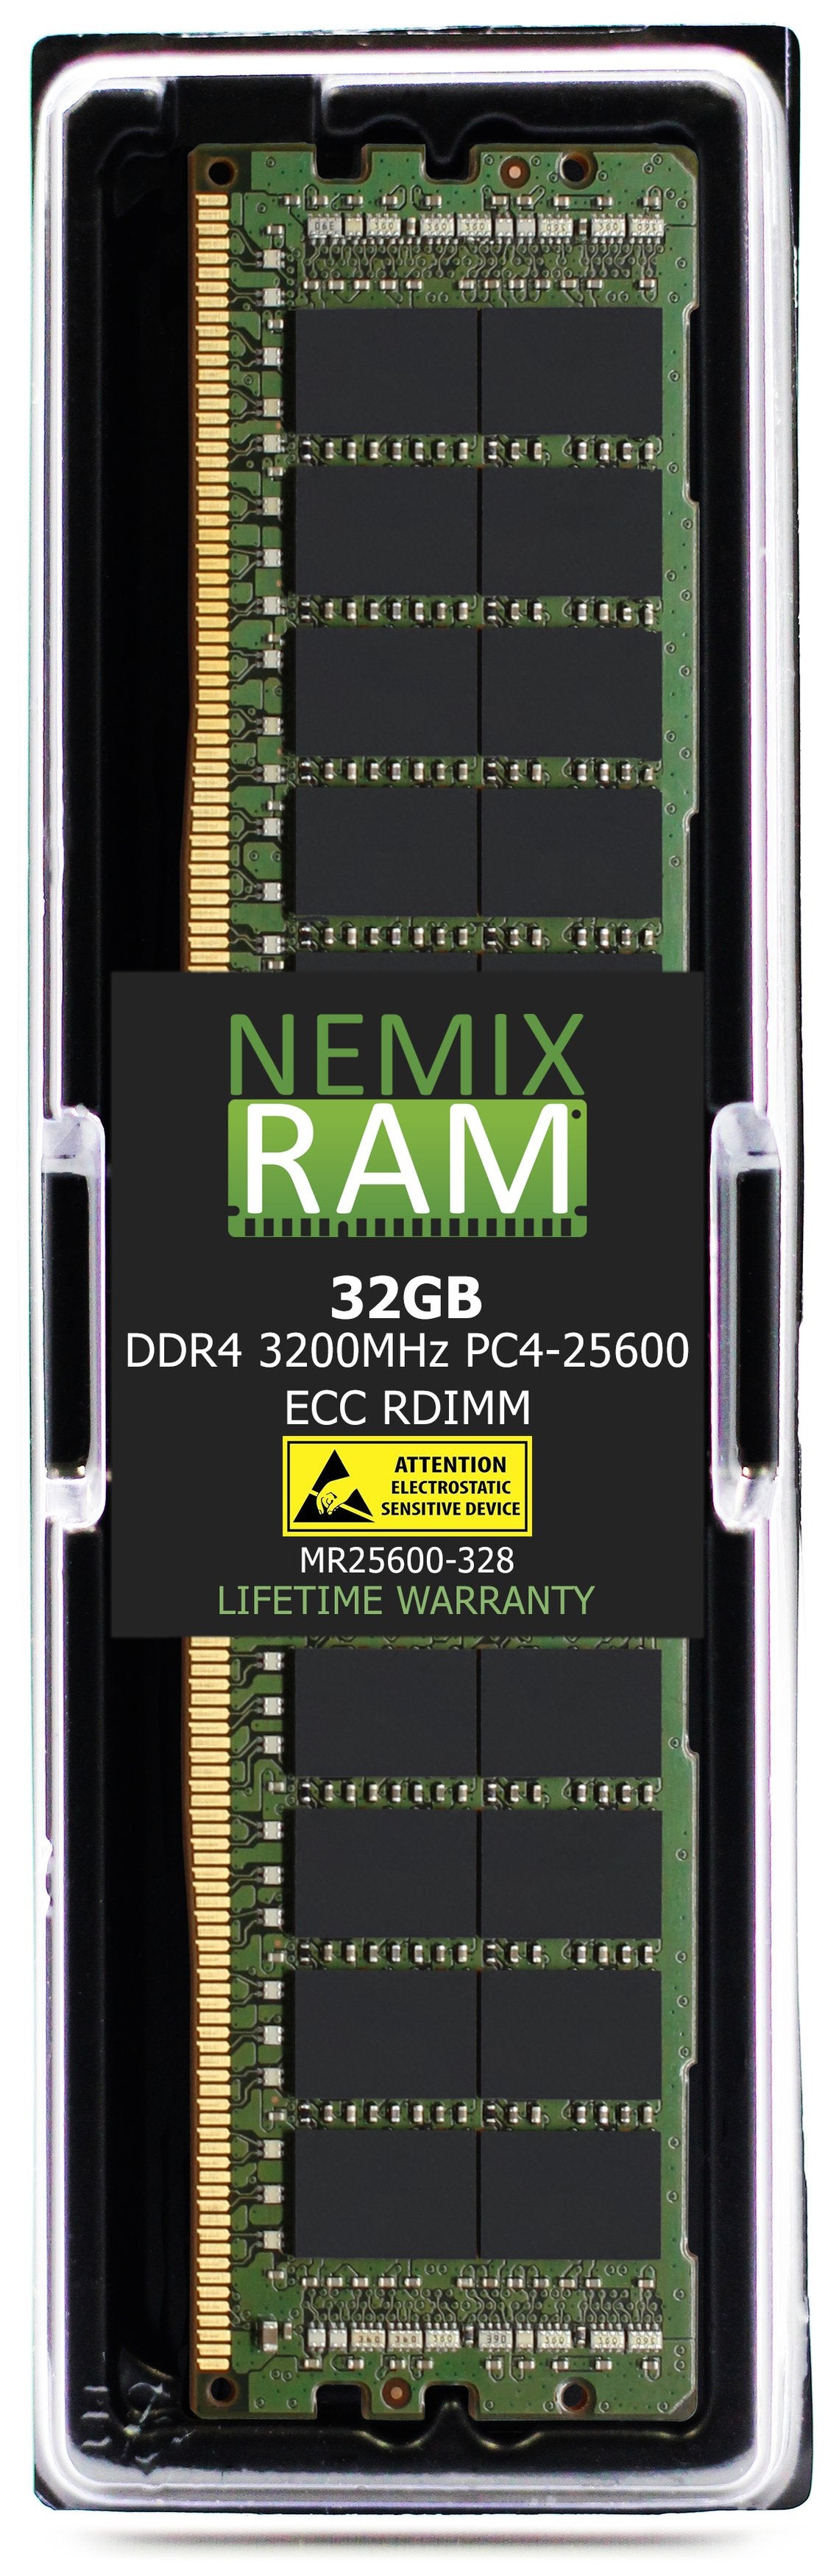 32GB DDR4 3200MHZ PC4-25600 RDIMM Compatible with Supermicro MEM-DR432MD-ER32